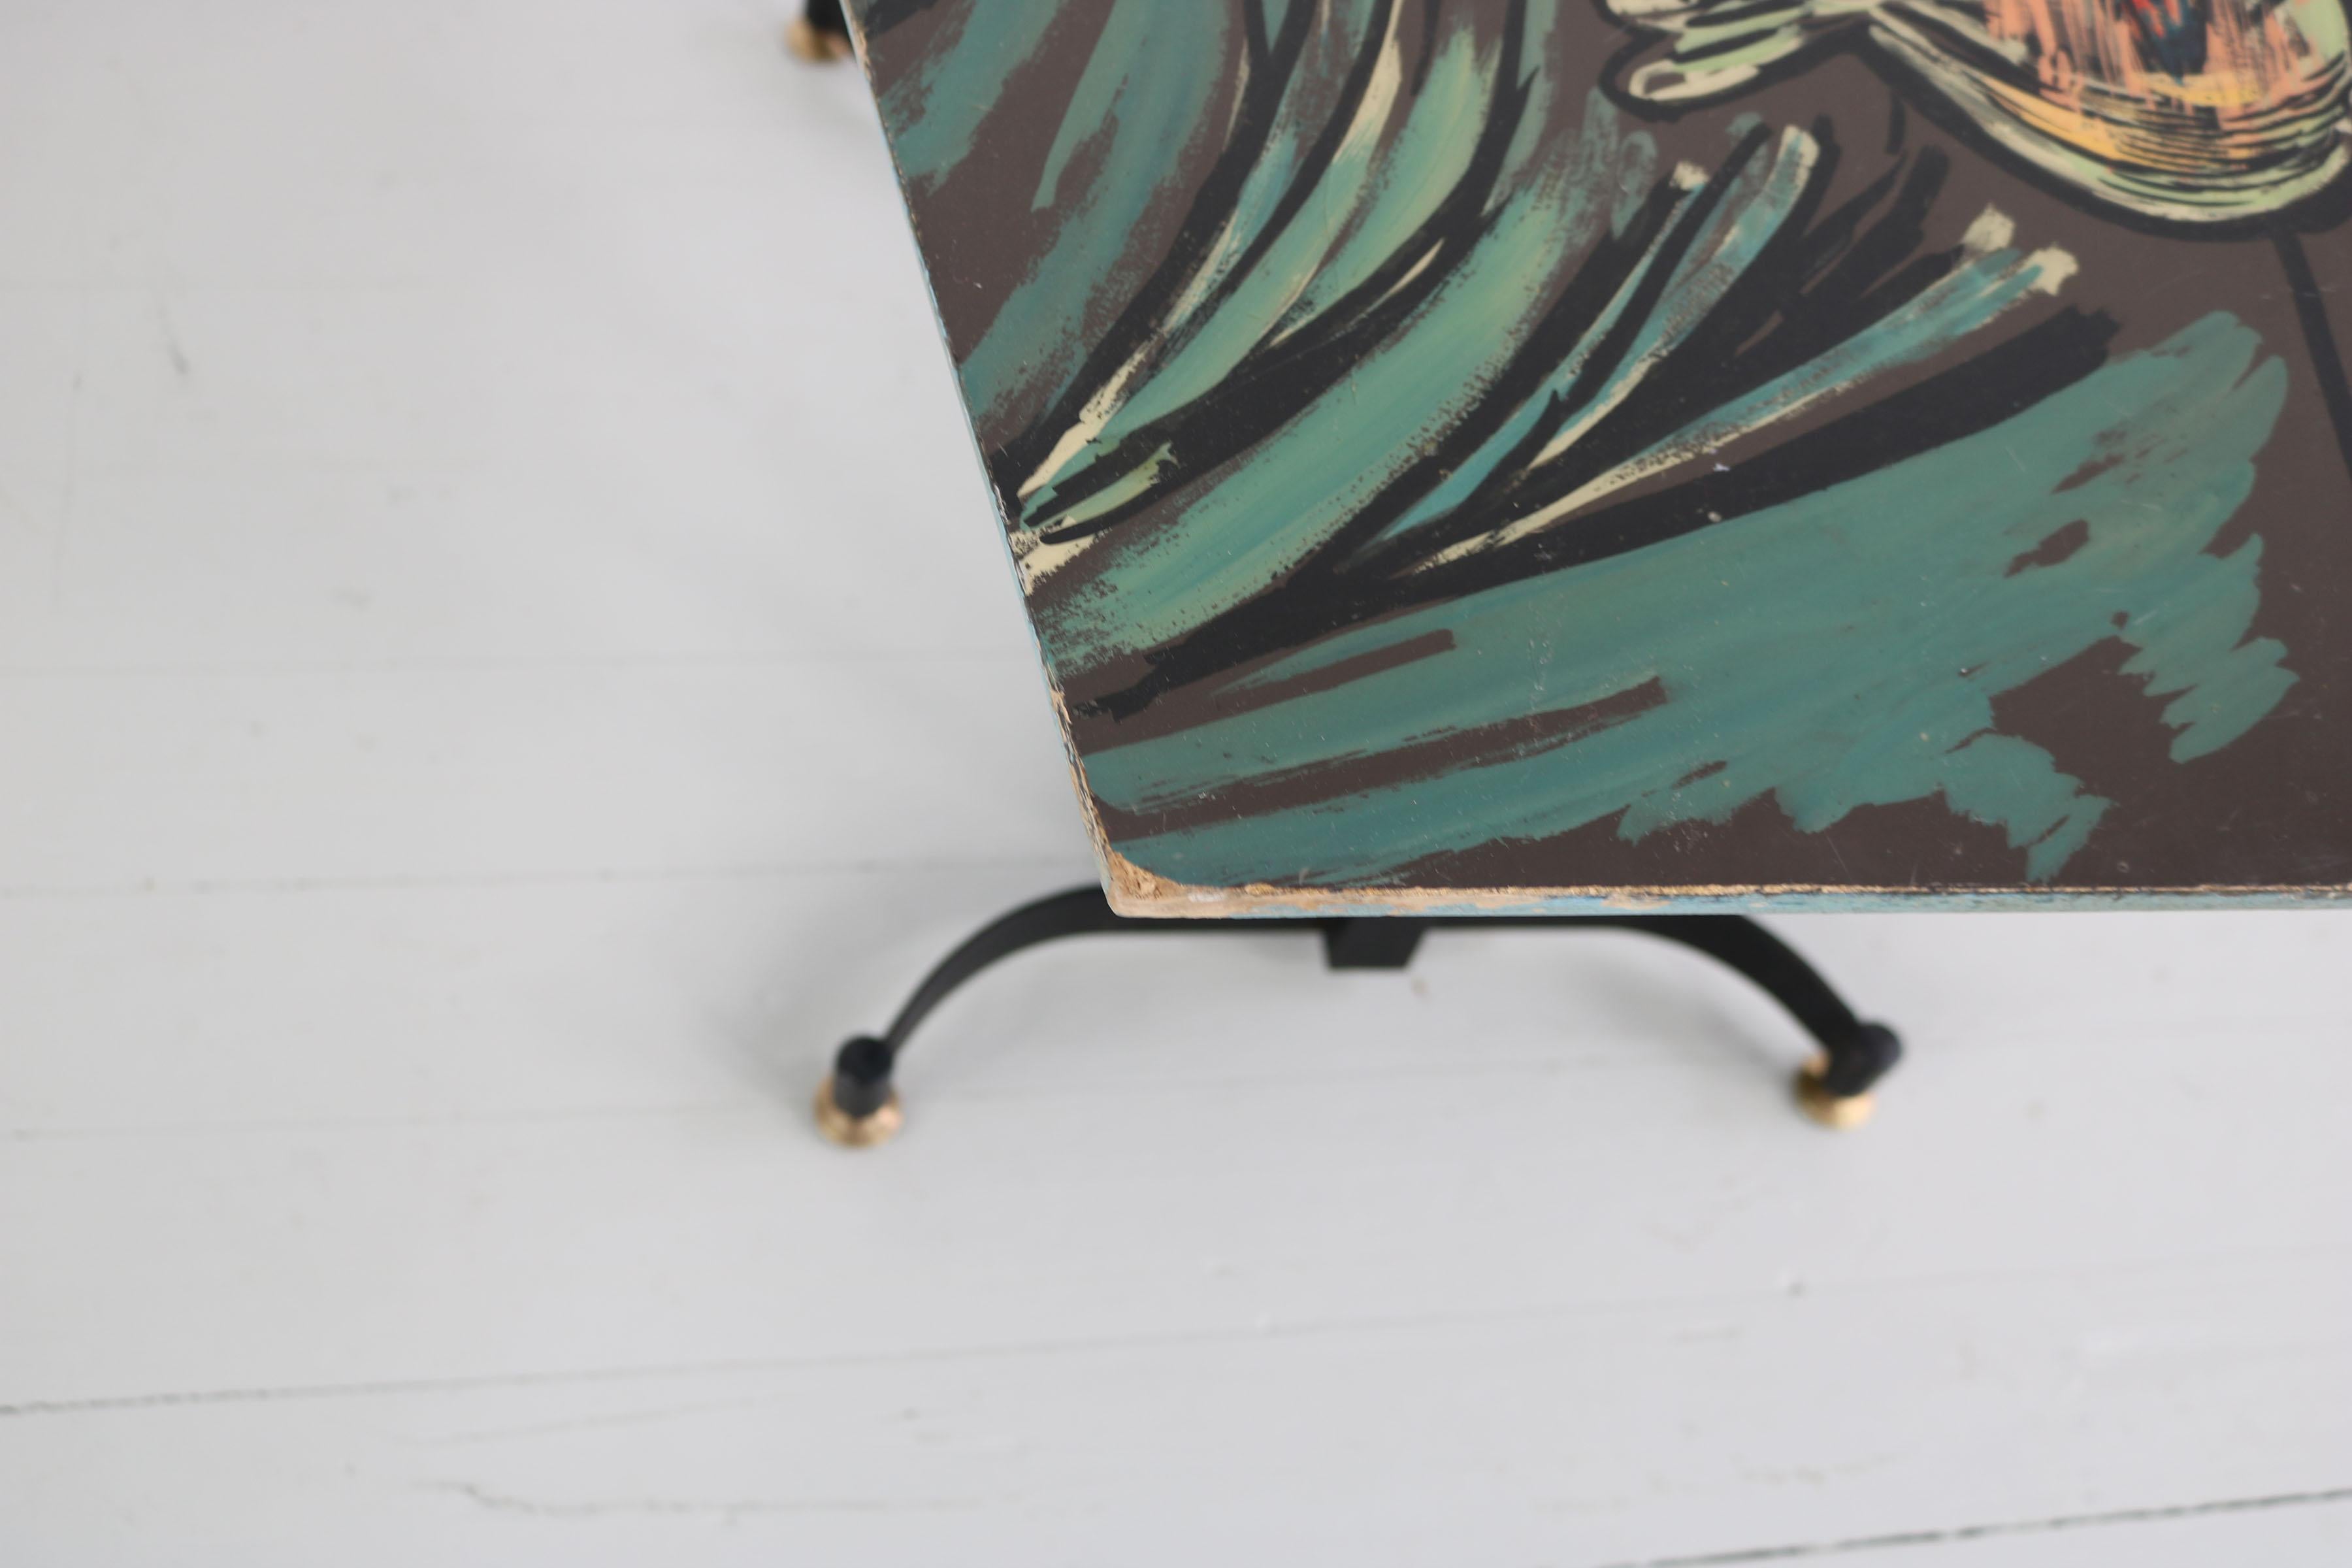 Italian Dark Sofa Table with Colorful Hand-Painted Motives on Table Top, 1950s For Sale 6